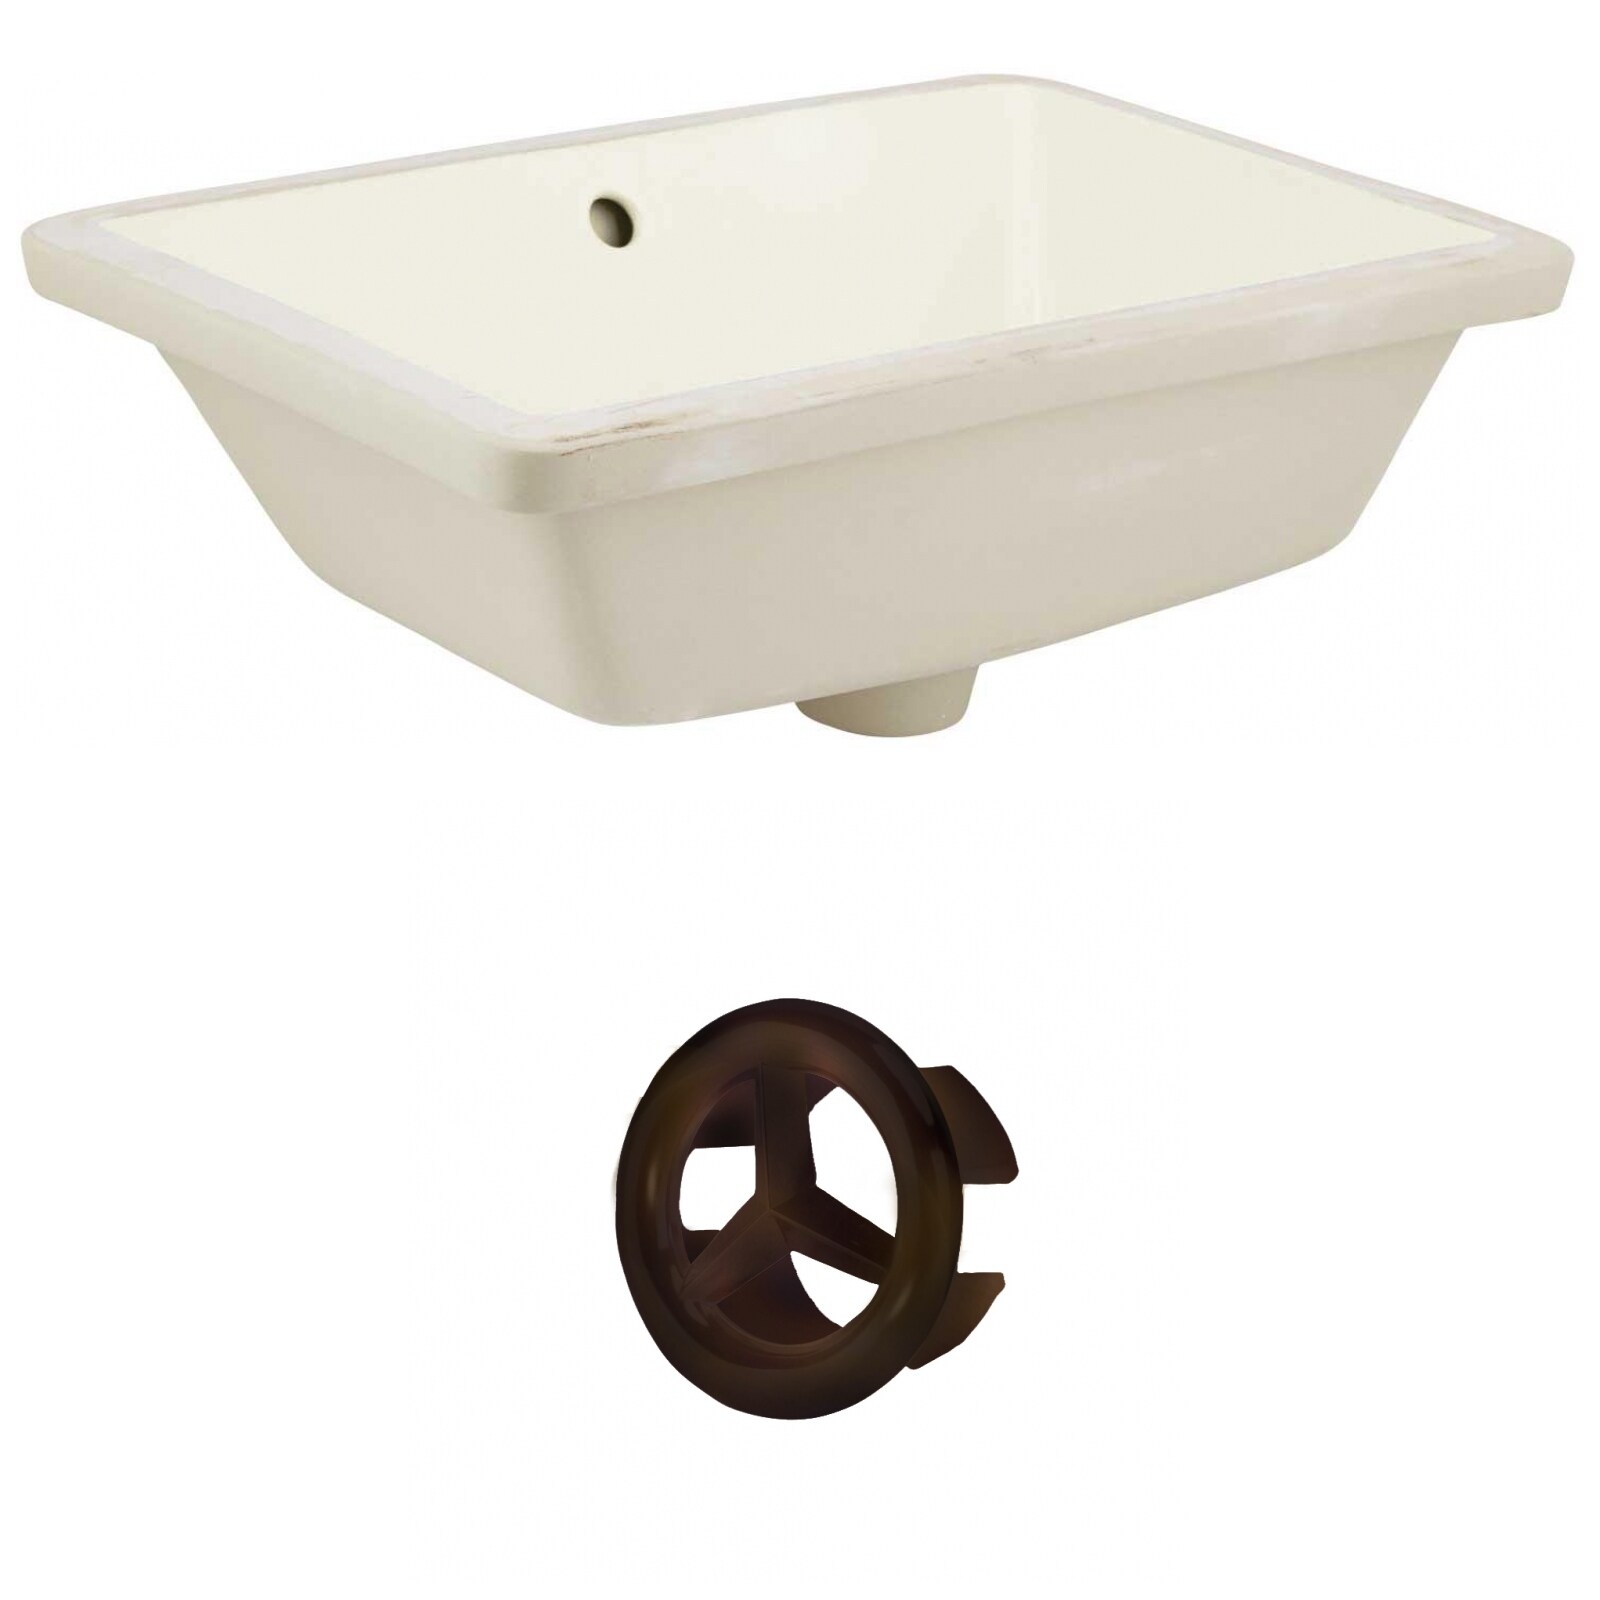 https://ak1.ostkcdn.com/images/products/is/images/direct/89c9fe239adc19882371276c1e91c67df36a8614/18.25-in.-W-Rectangle-Undermount-Sink-Set-In-Biscuit---Oil-Rubbed-Bronze-Hardware.jpg